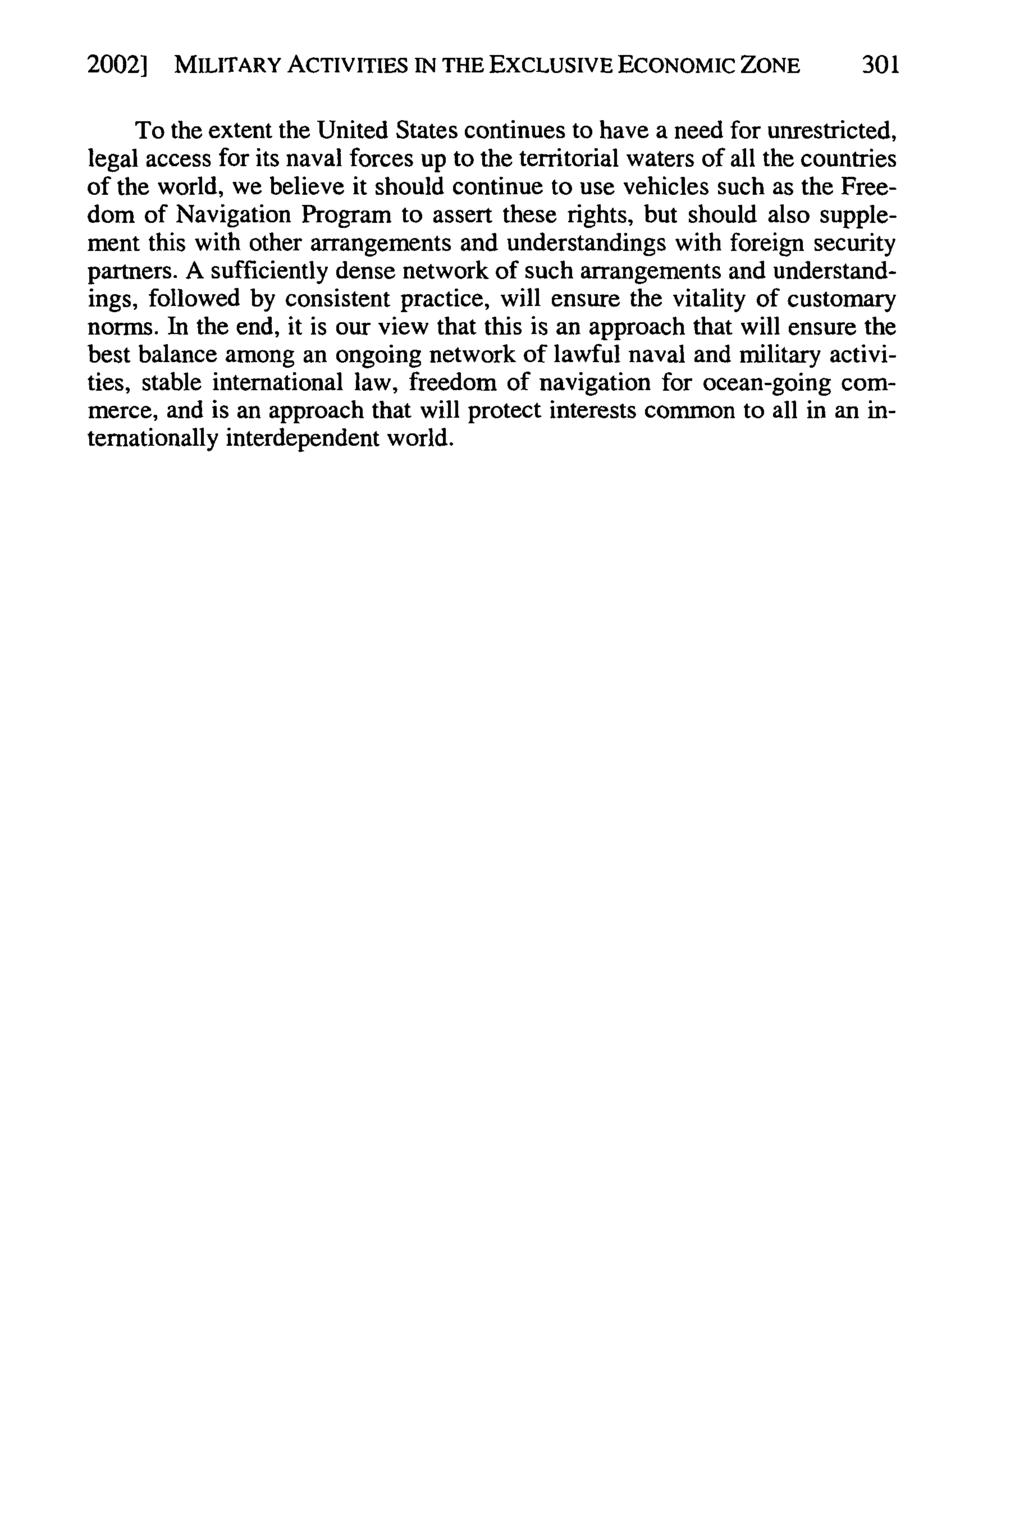 2002] Galdorisi, MILITARY and Kaufman,: ACTIVITIES Military Activities IN THE EXCLUSIVE in the Exclusive Economic ECONOMIC Zone: ZONE Preventing Un 301 To the extent the United States continues to